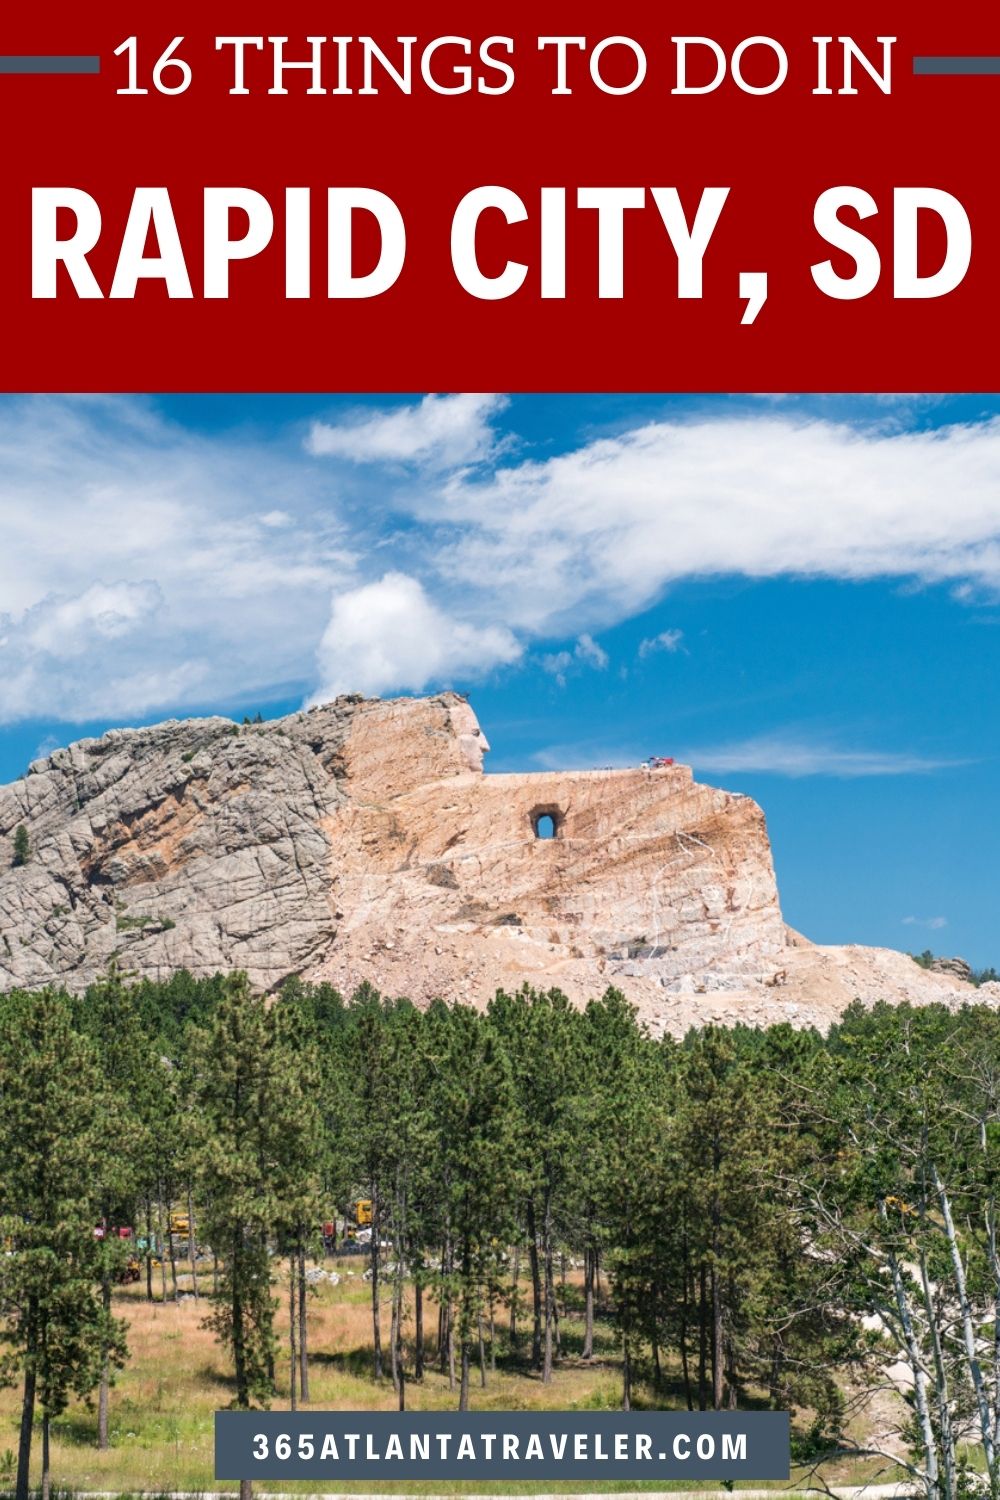 16 THINGS TO DO IN RAPID CITY SD YOU CAN'T MISS